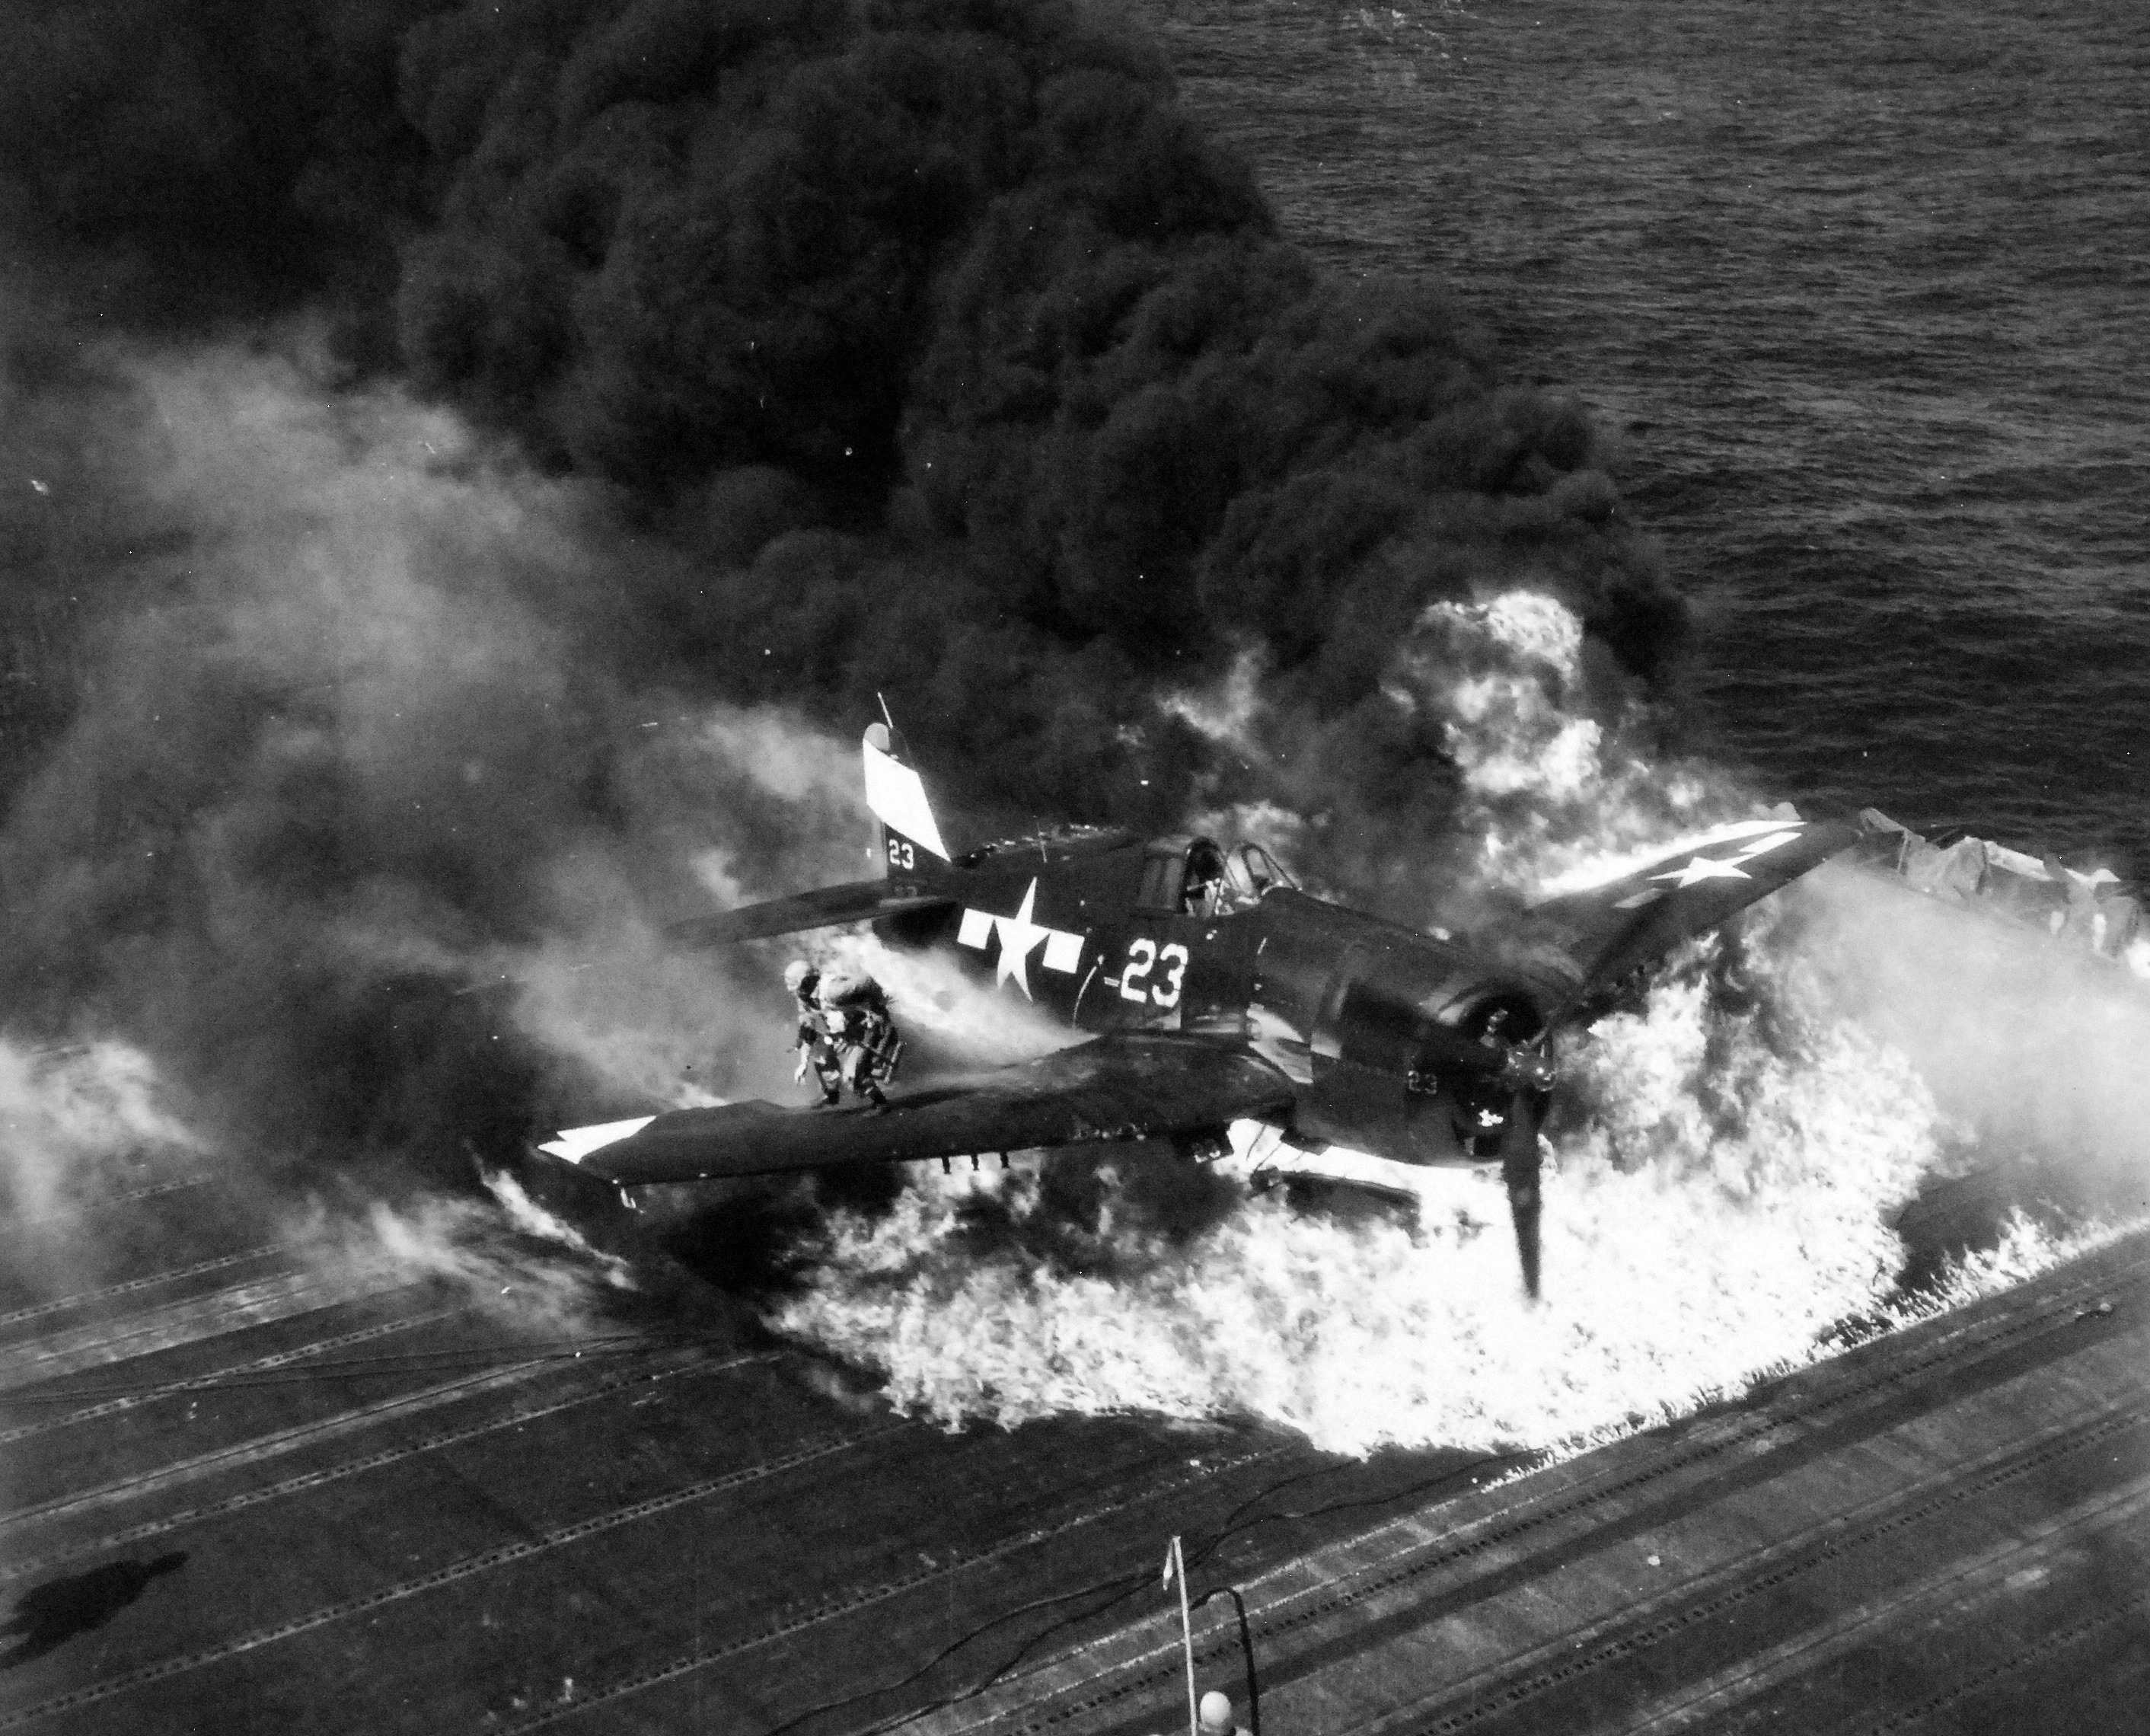 Ensign Ardon R. Ives of Fighting-Bombing Squadron VBF-9 crashed his F6F-5 Hellcat through the barrier on USS Lexington (Essex-class) and ruptured the center-line fuel tank, Feb 1945, western Pacific. Photo 6 of 7